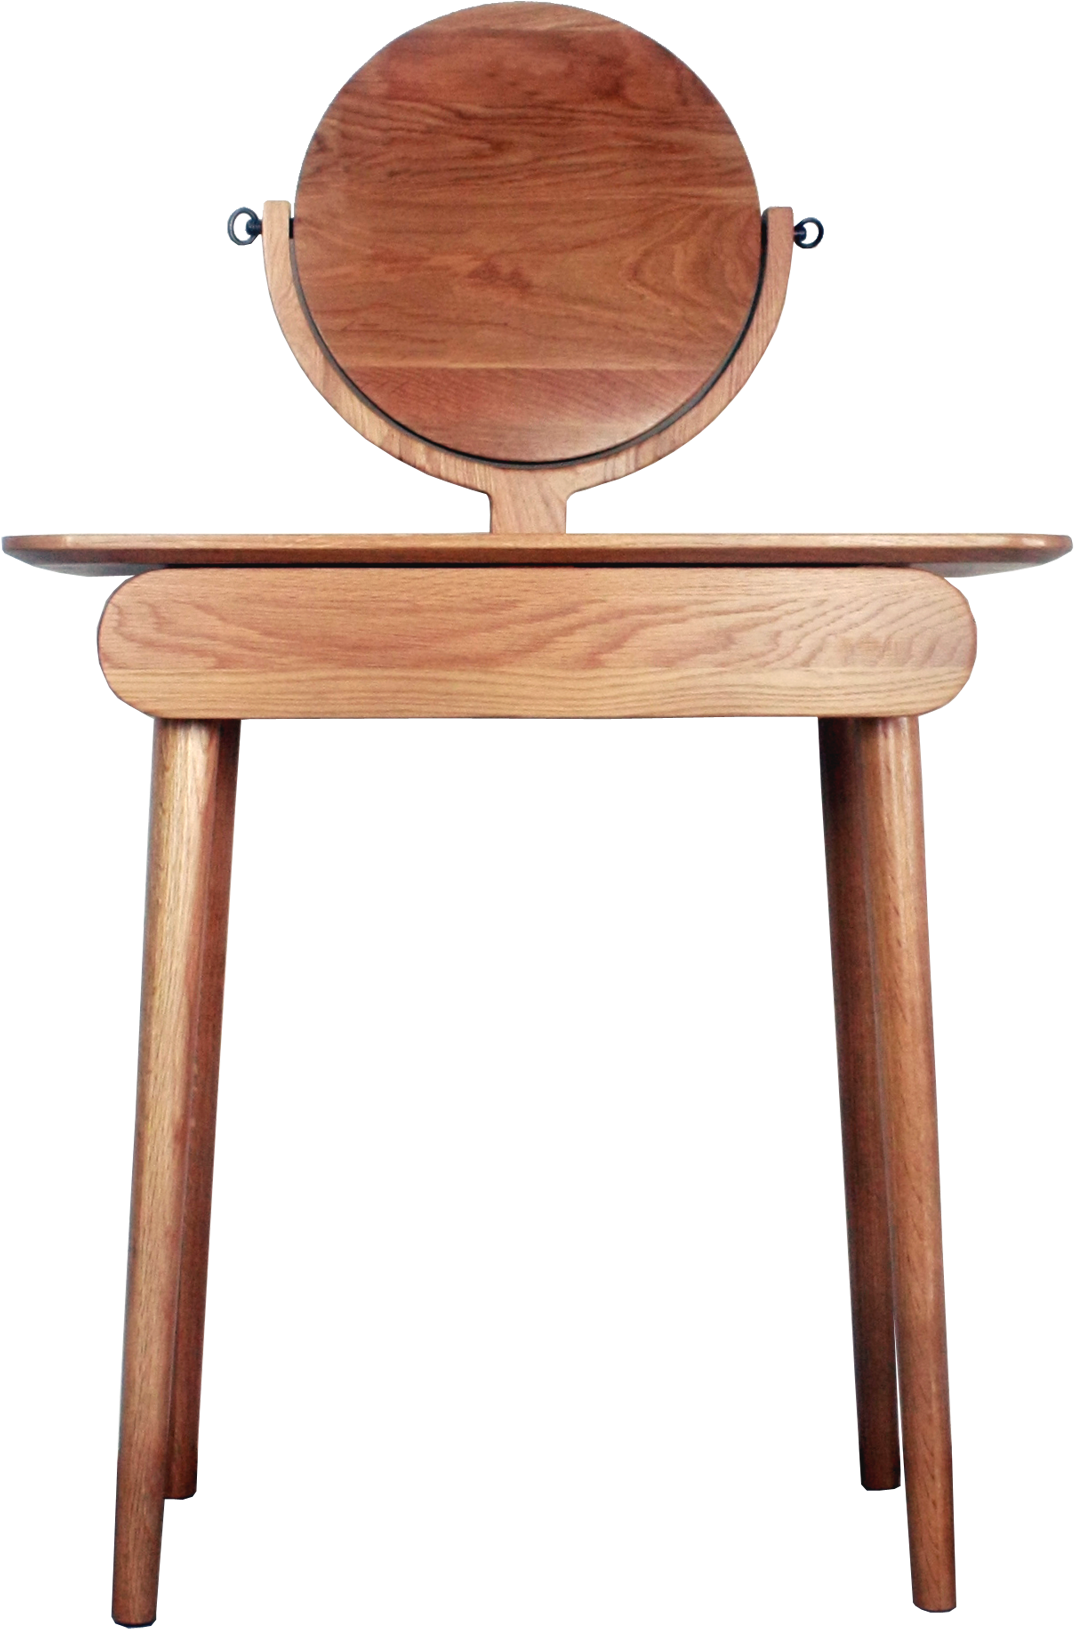 A Wooden Chair With A Round Back